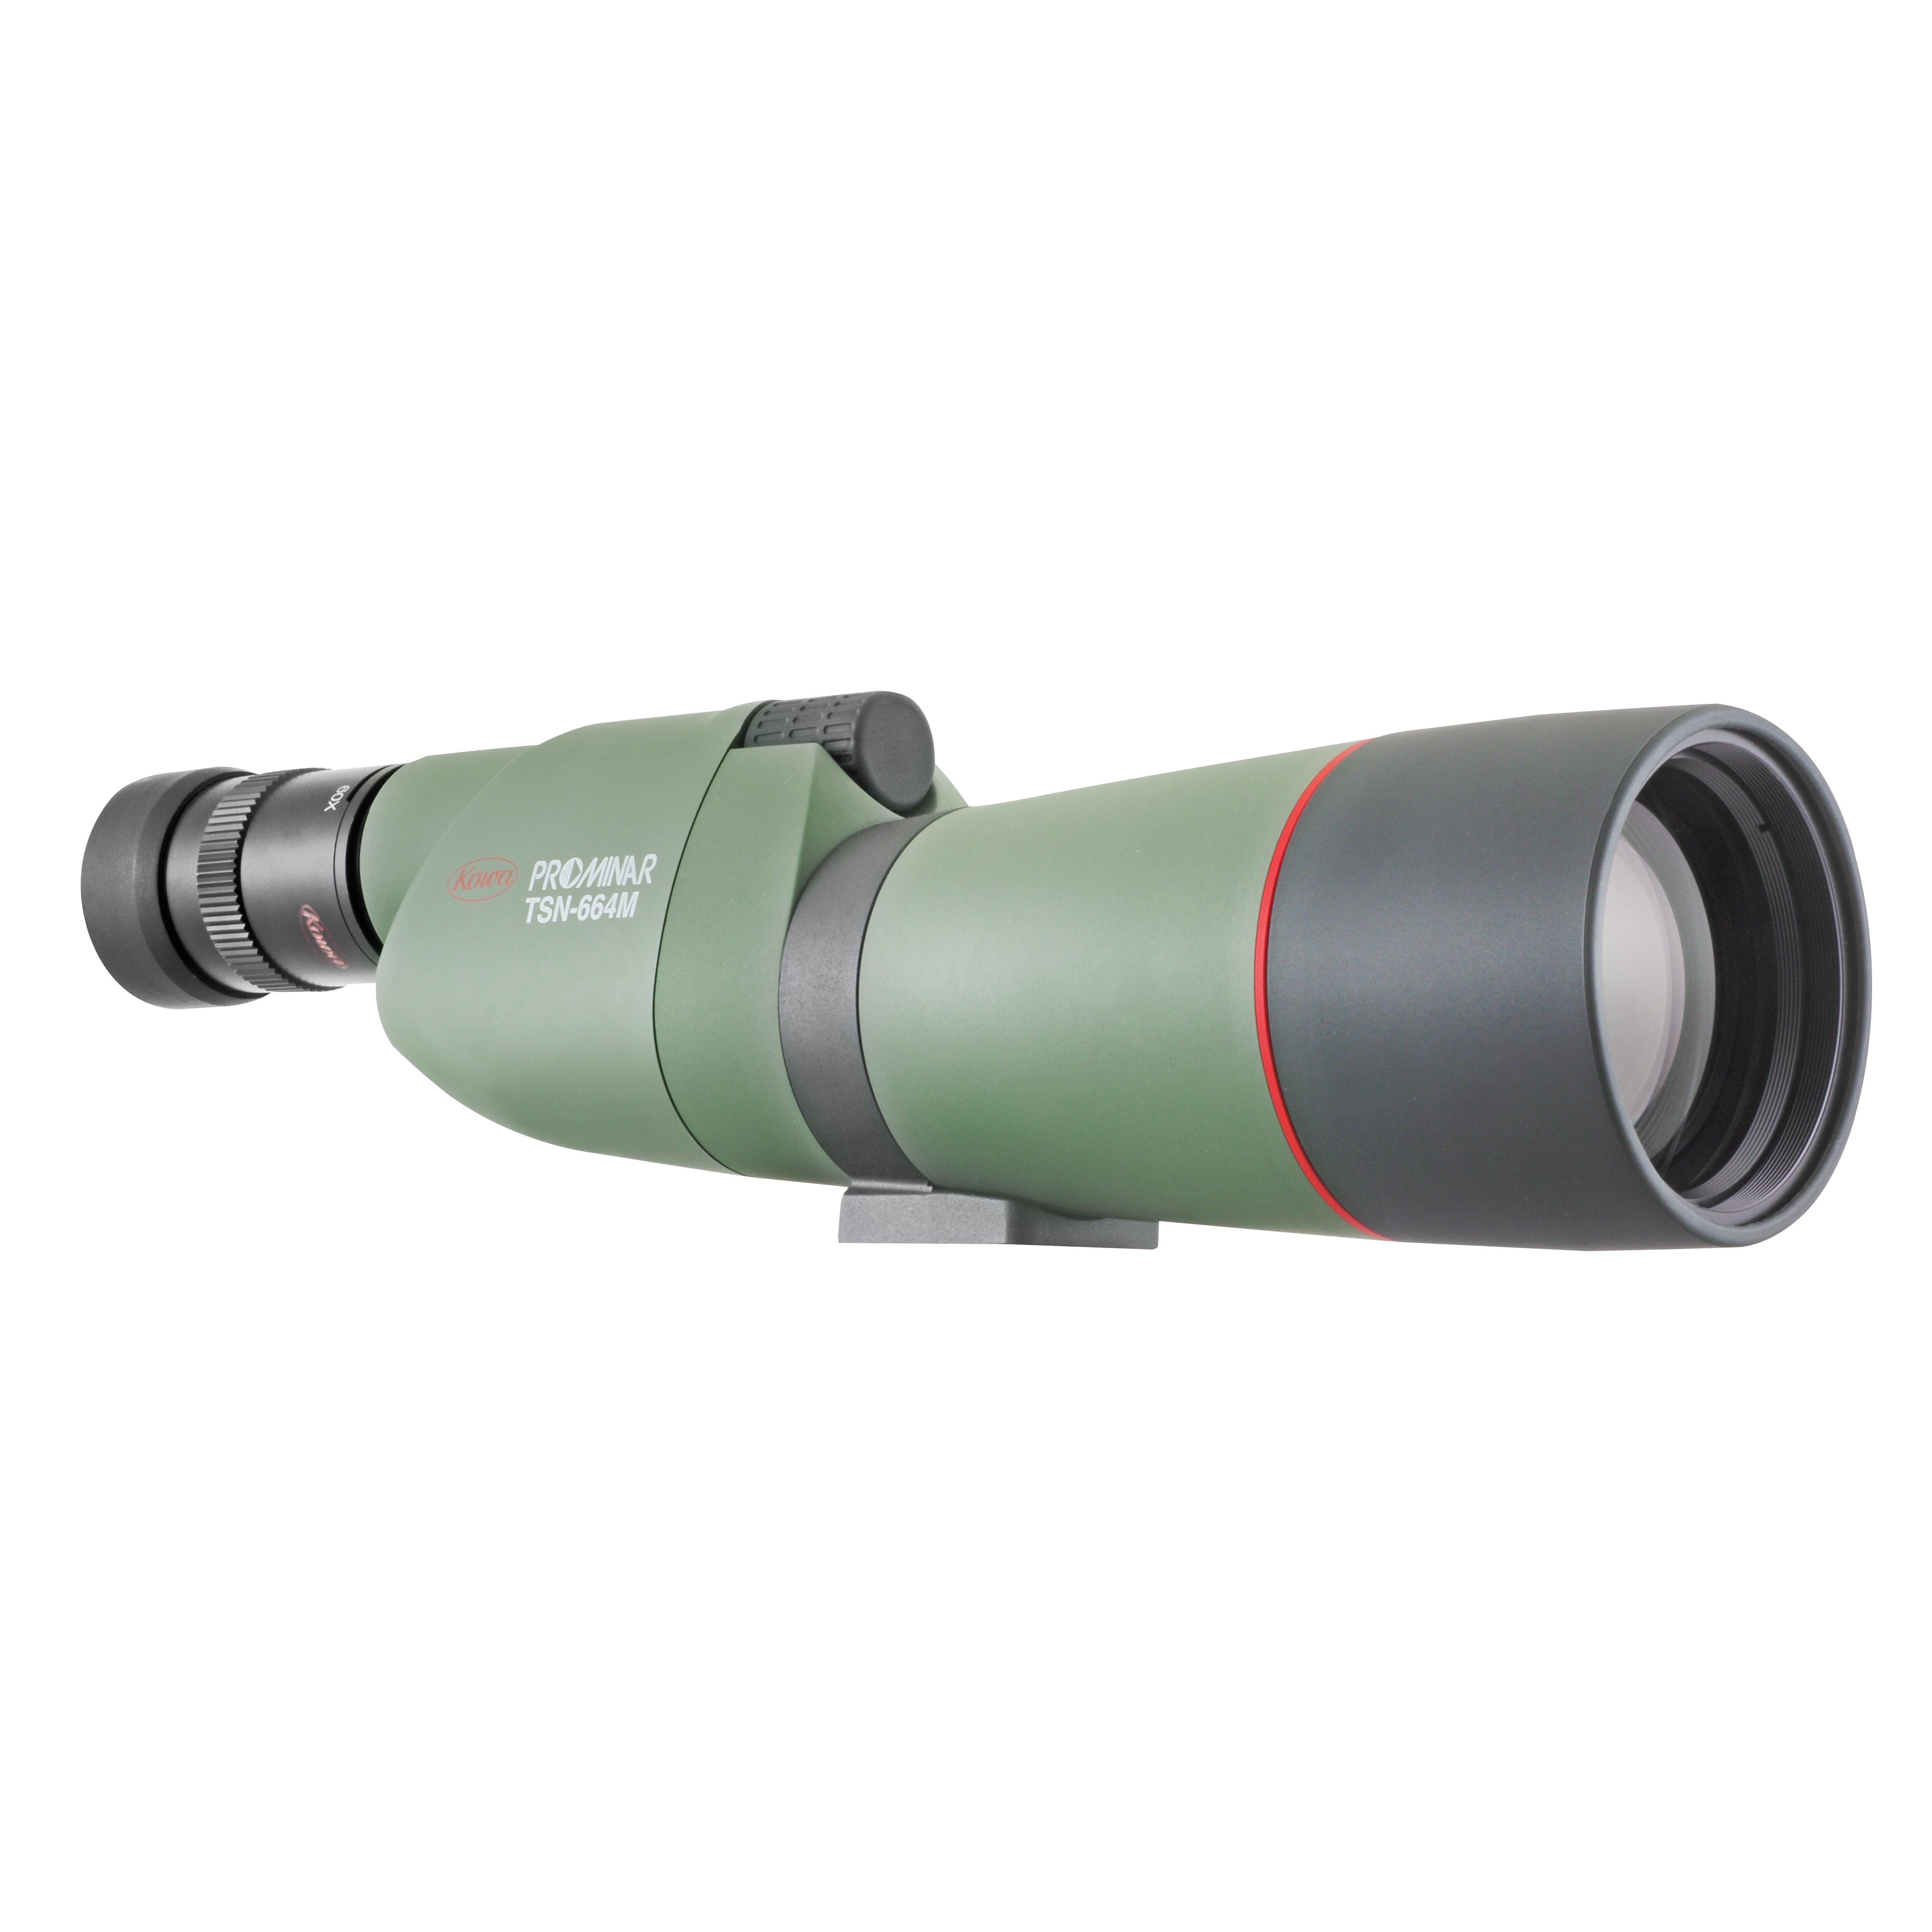 Kowa TSN-664M straight spotting scope with 20-60x zoom and stay on case